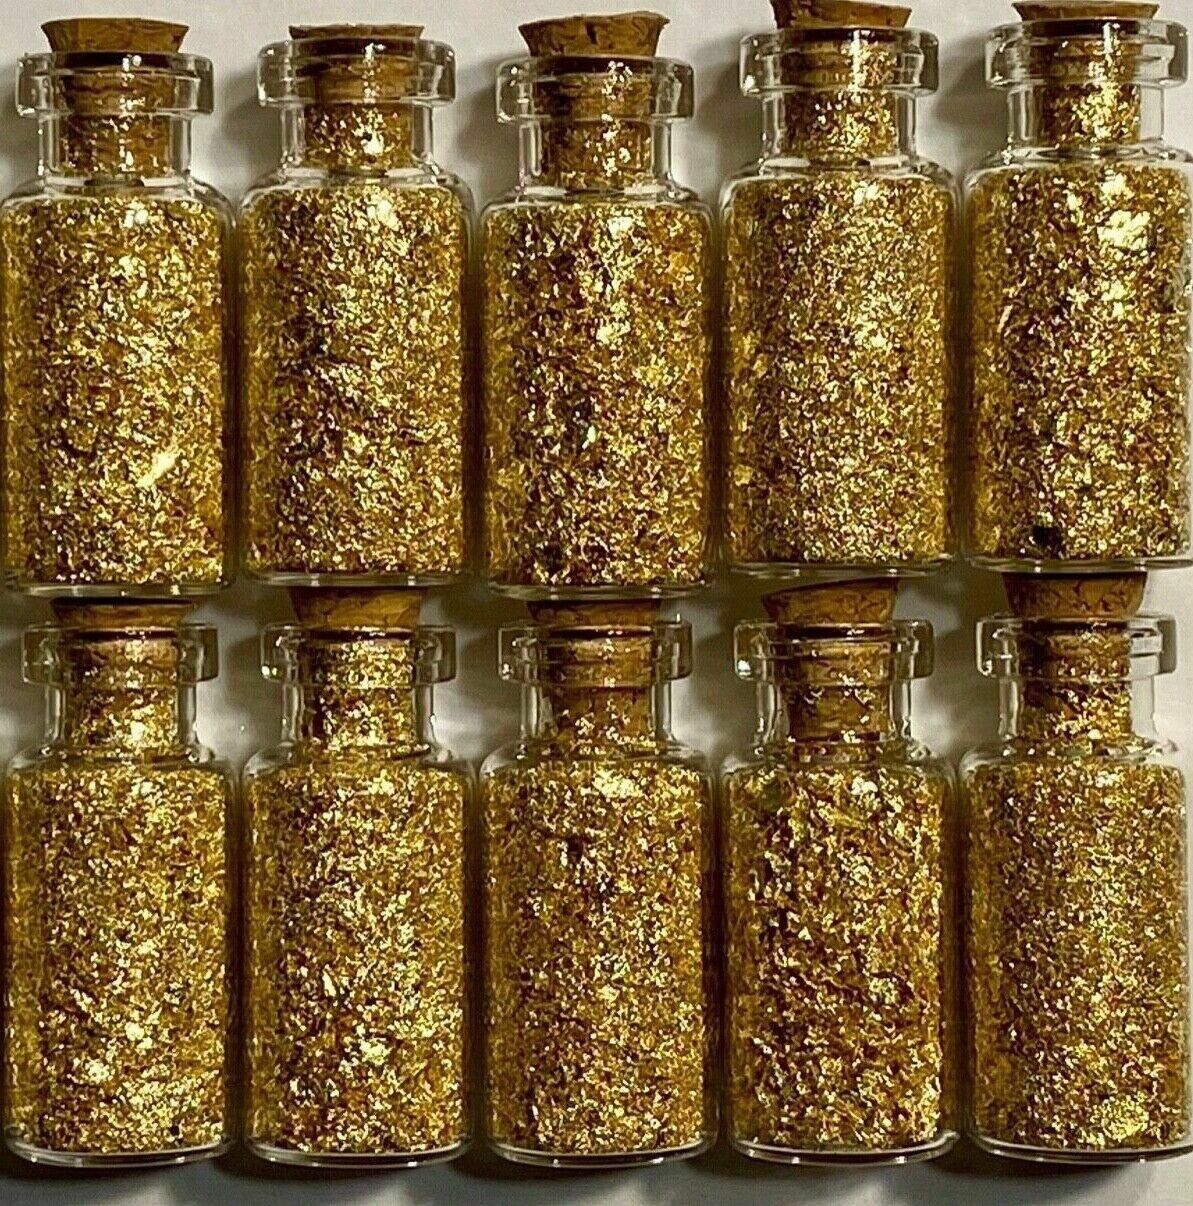 9 Bottles of Large Gold Flakes ..... Lowest price on the Net